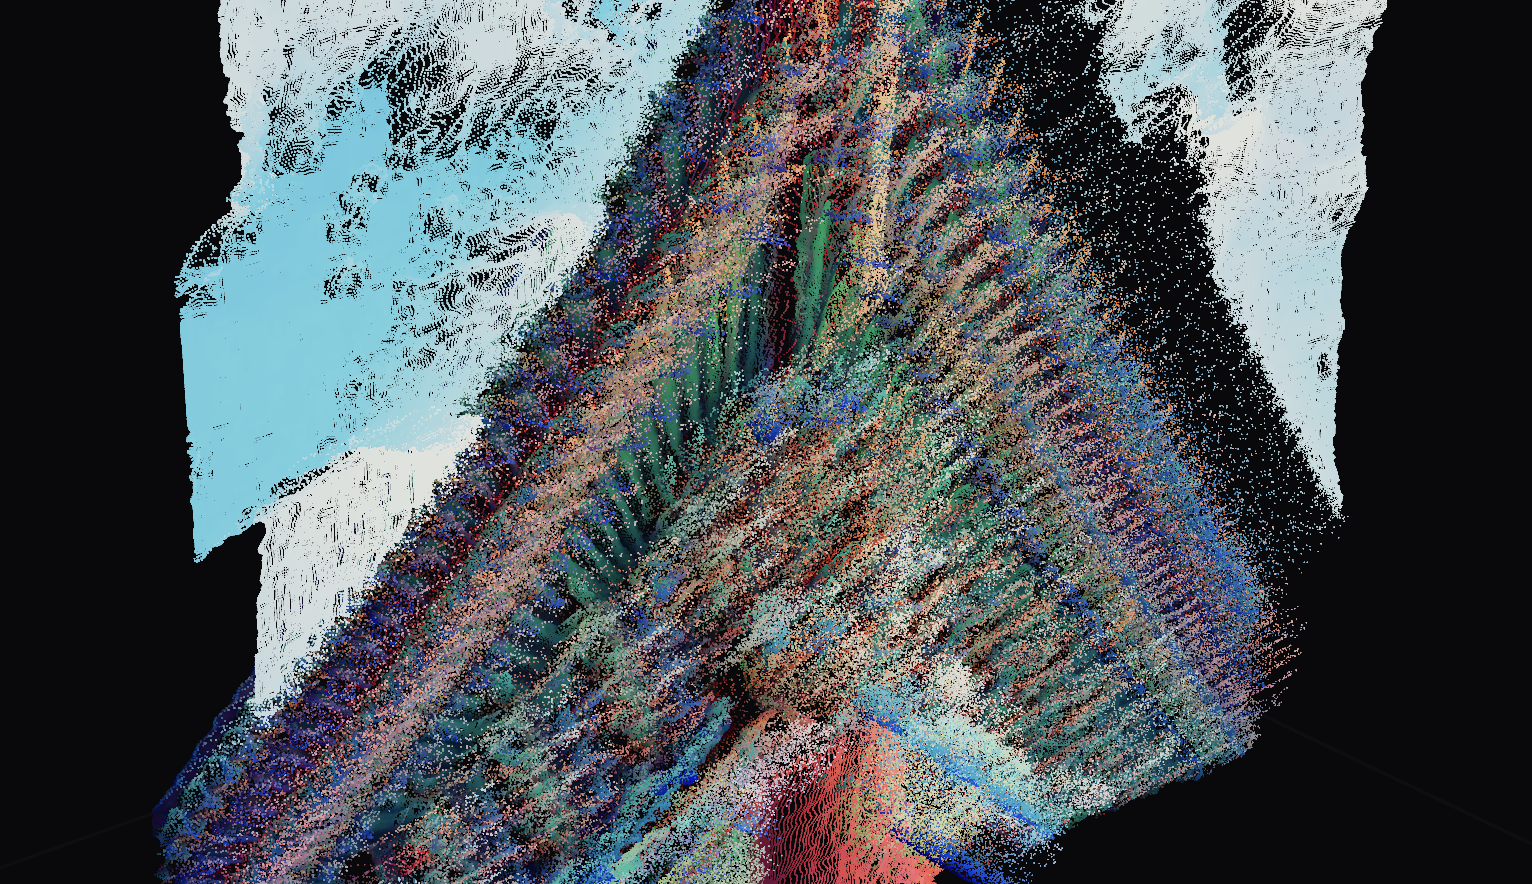 Preview image of the work "Color Palettes from Images: Particles and React Three Fiber"